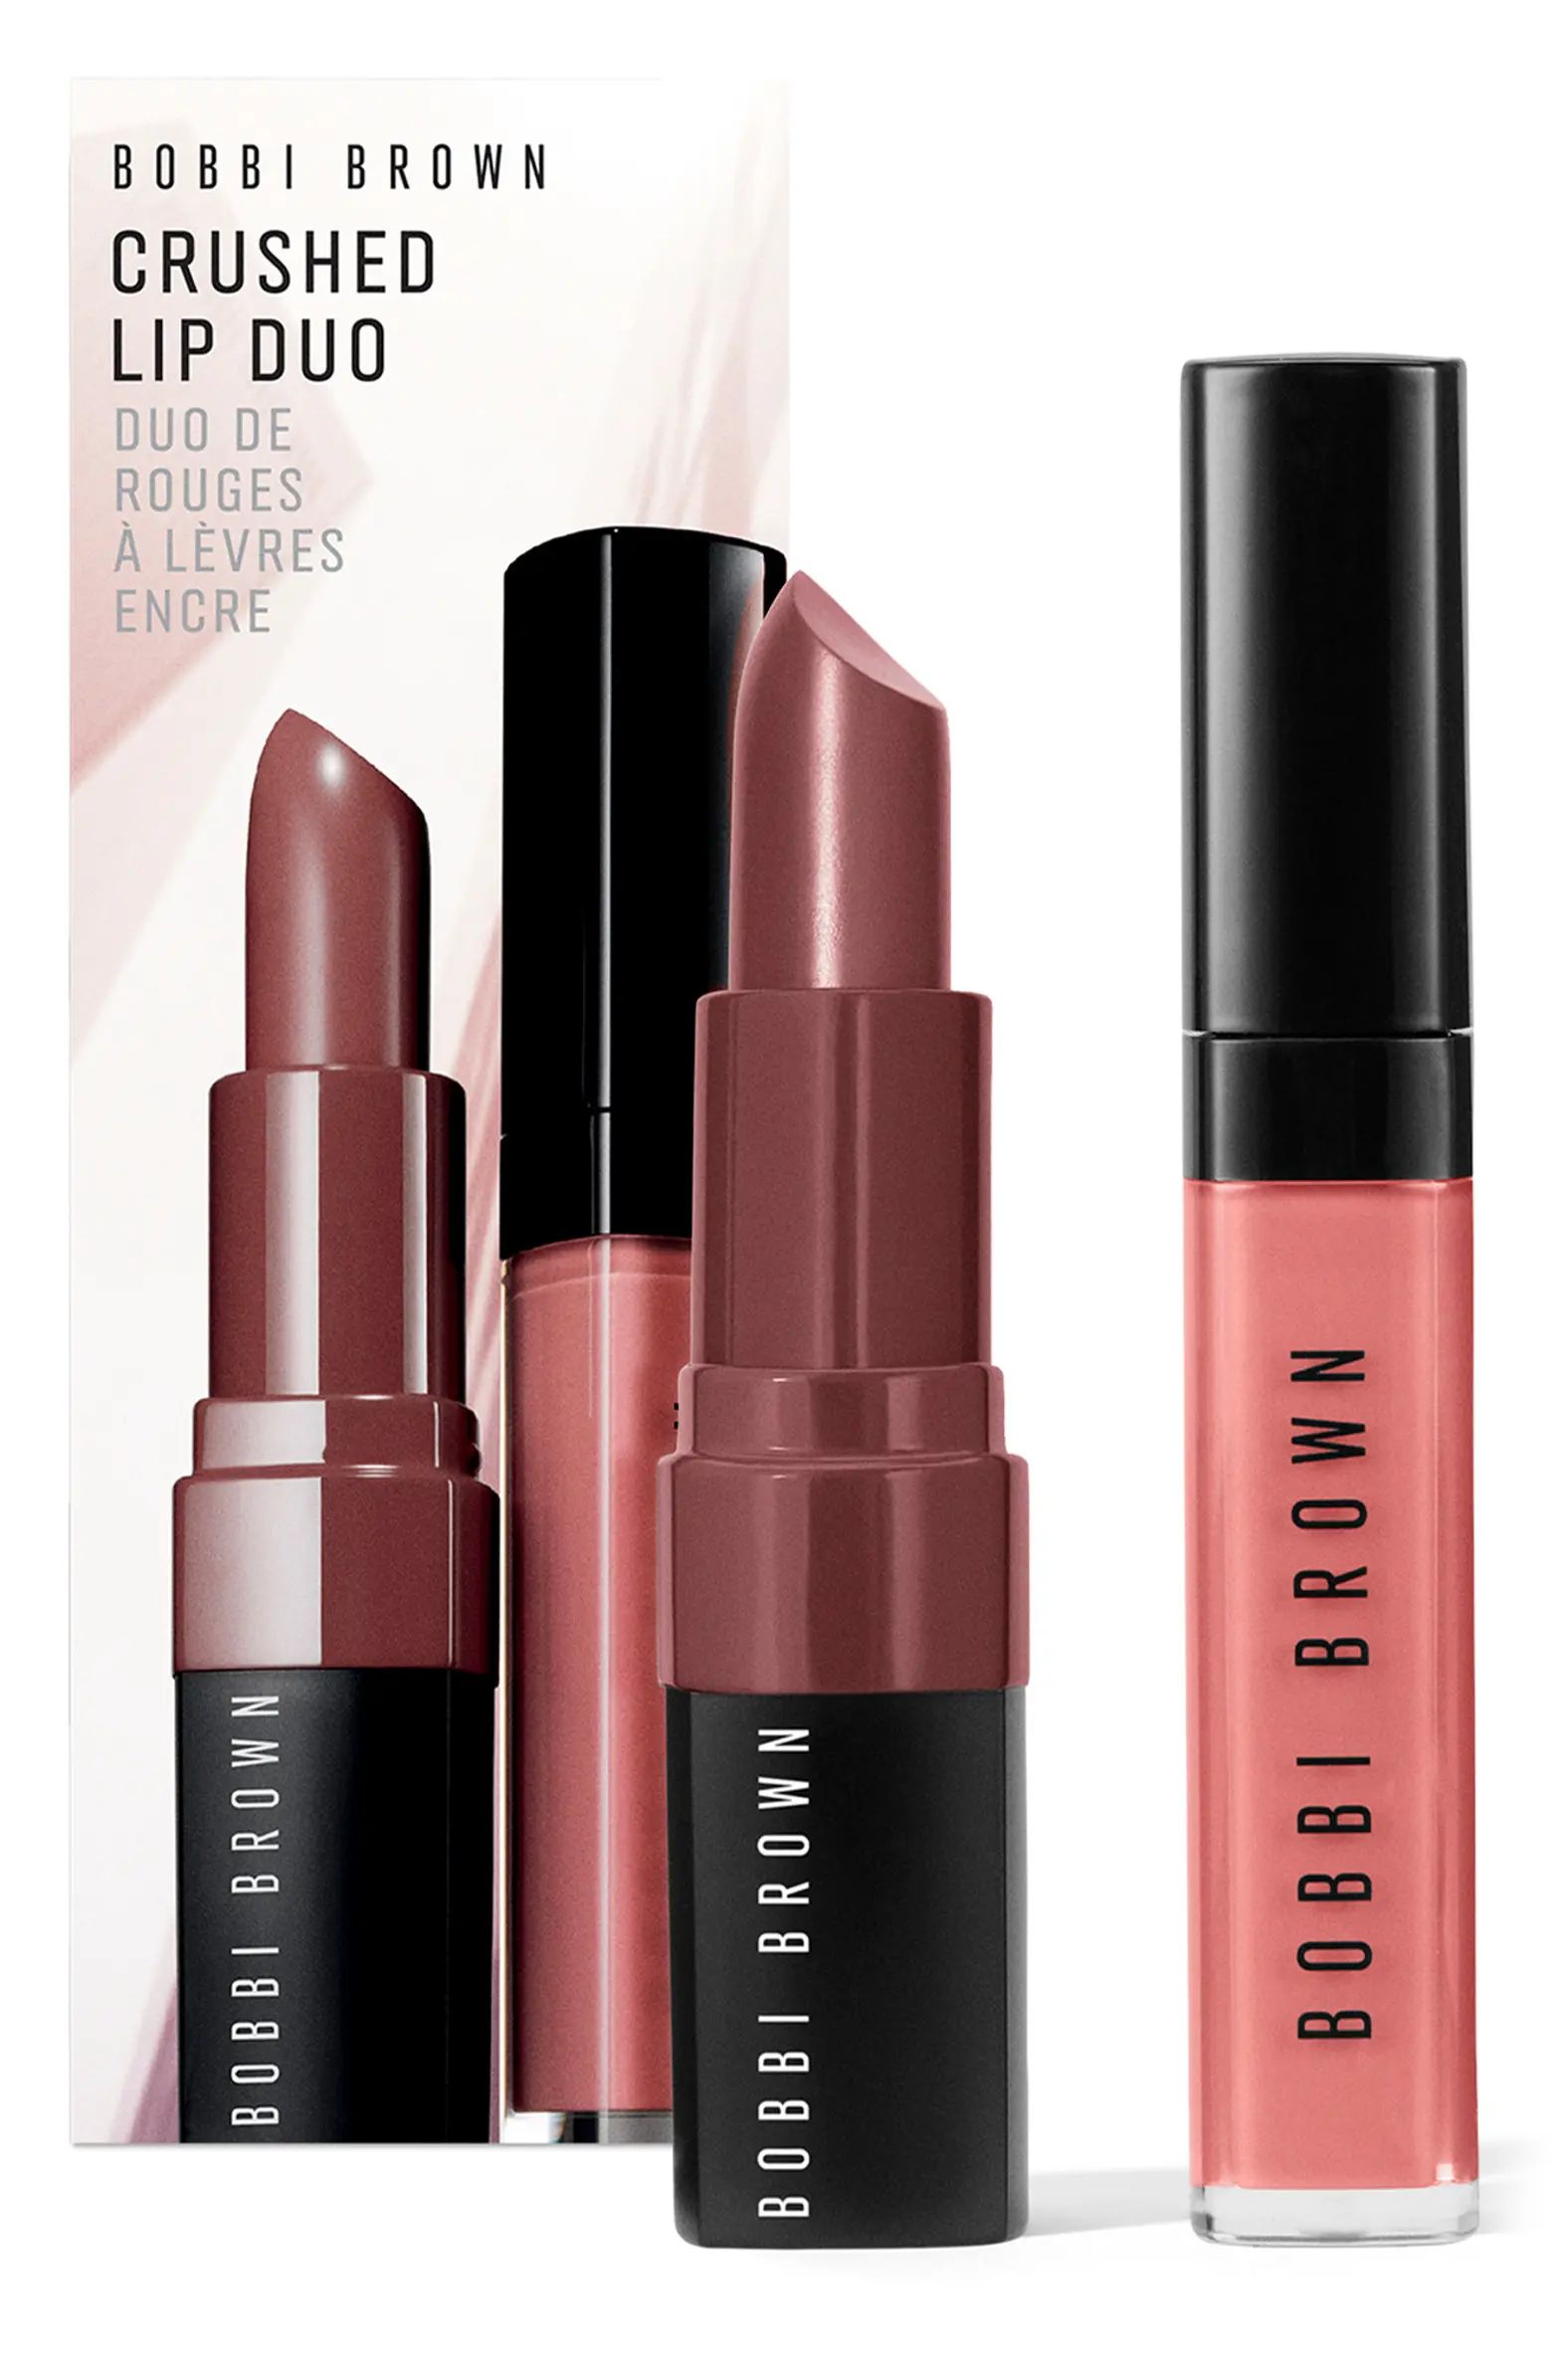 Crushed Lip Duo Set (Nordstrom Exclusive) $64 Value | Nordstrom